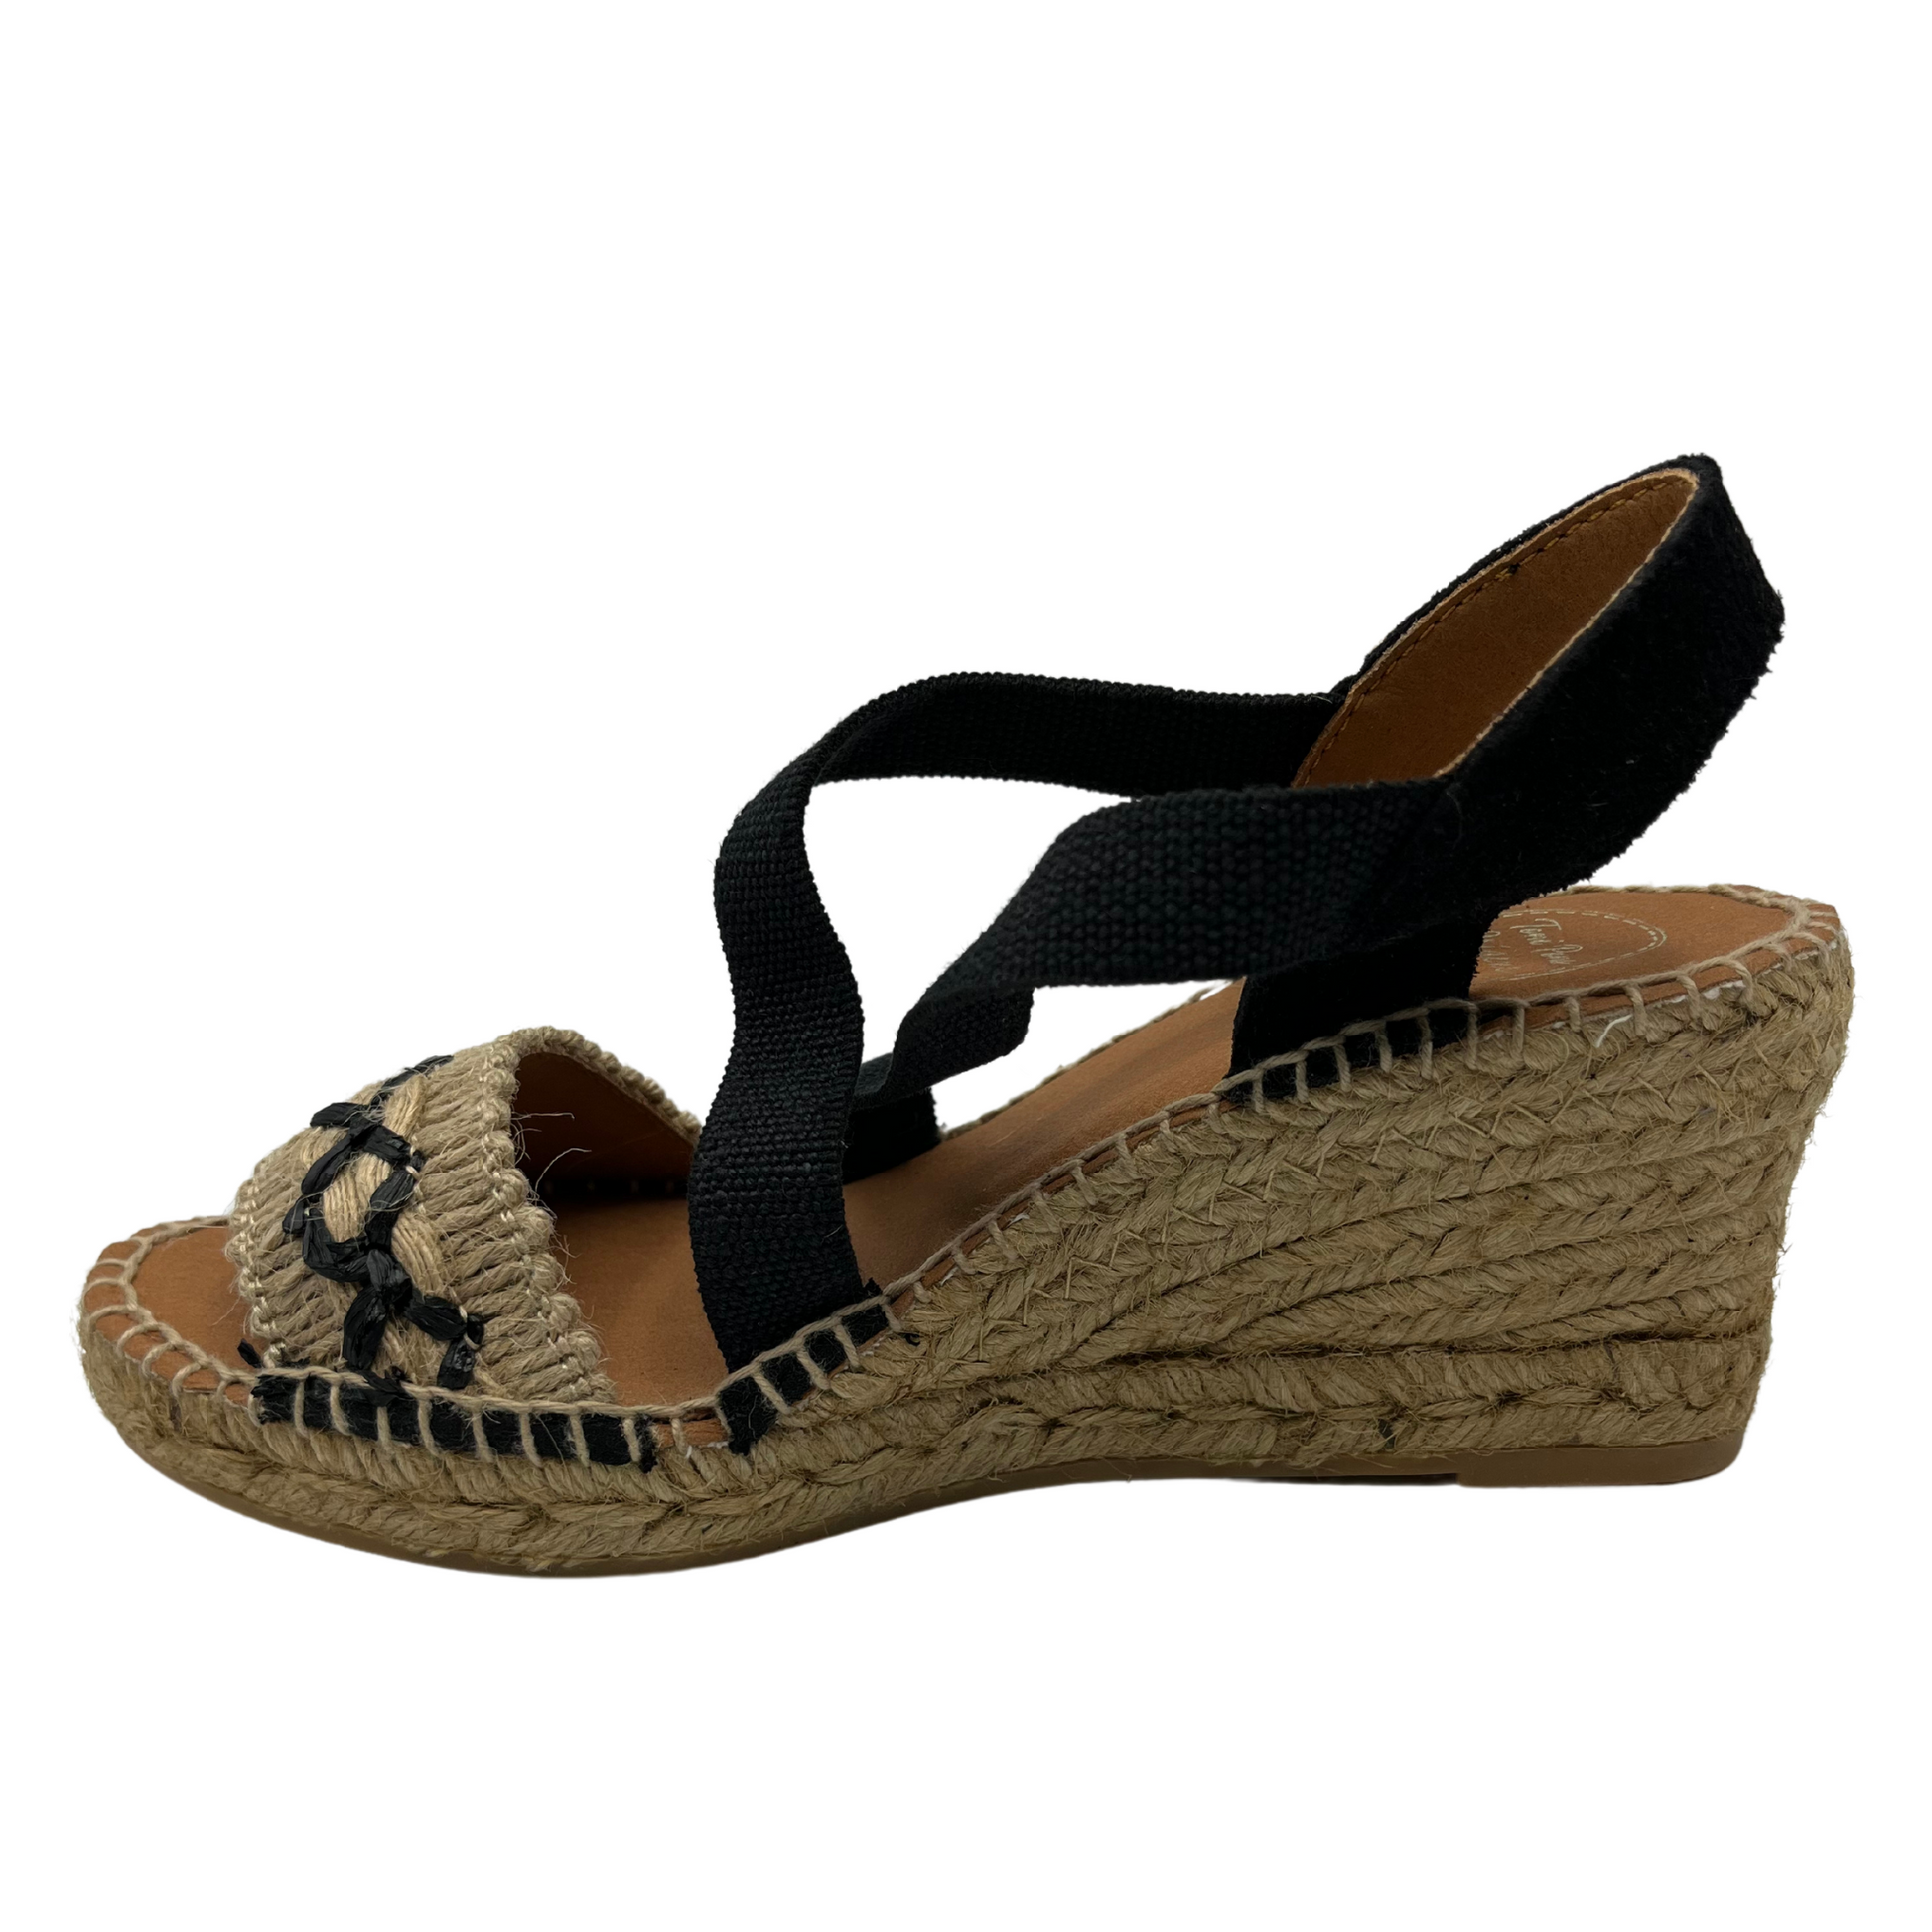 Left facing view of black and beige wedge sandal with X pattern across toe